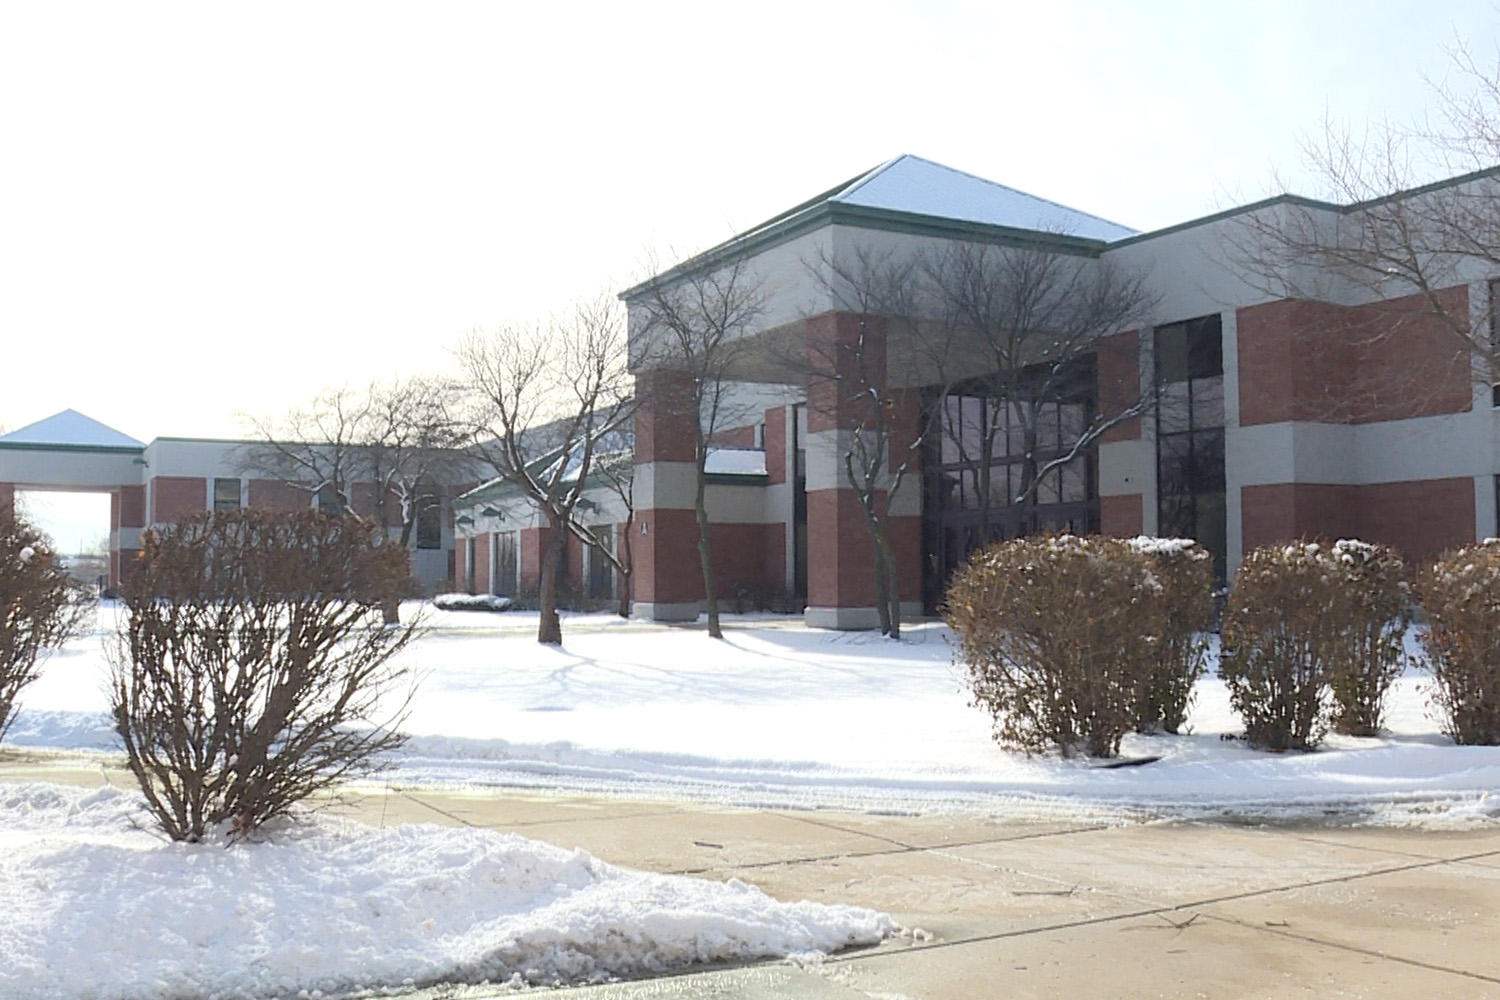 The old Carrie Gosch Elementary school building which now houses some EPA offices, district facilities, and The Cross Church.